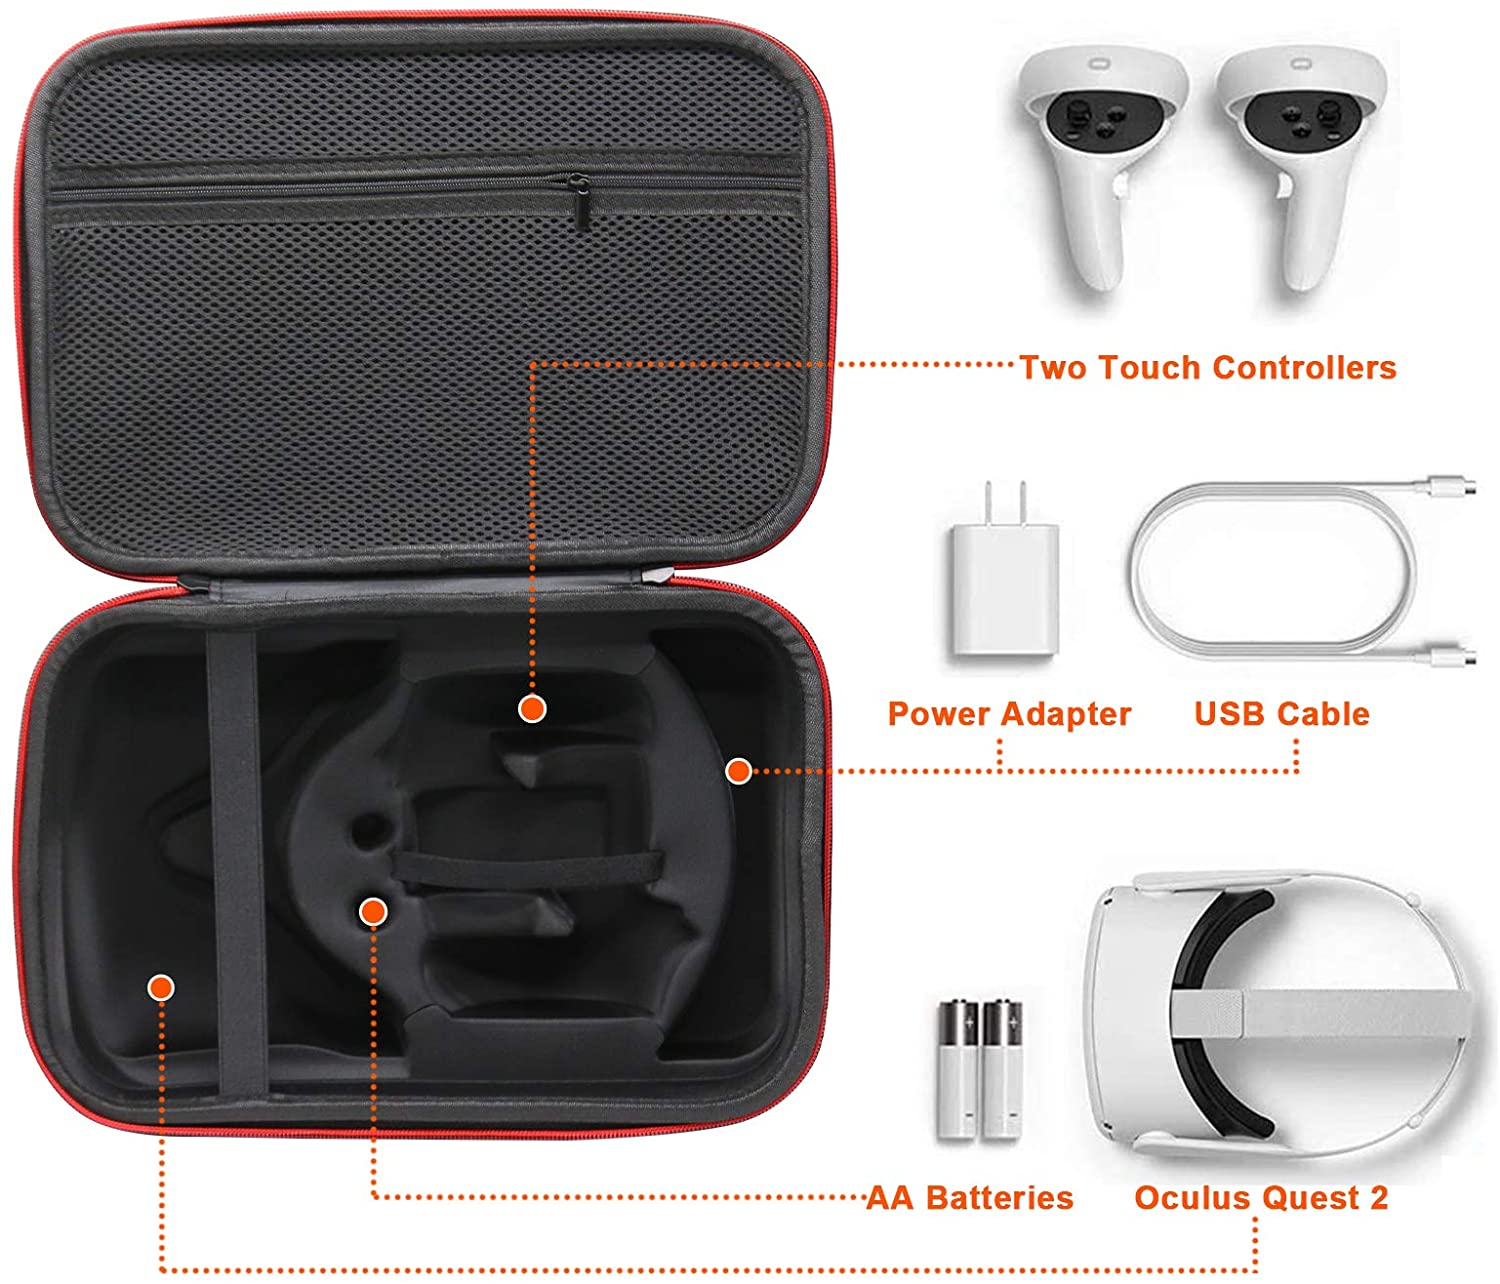 Cases can hold two VR controllers, power adapter, USB cable, batteries, and VR headset.